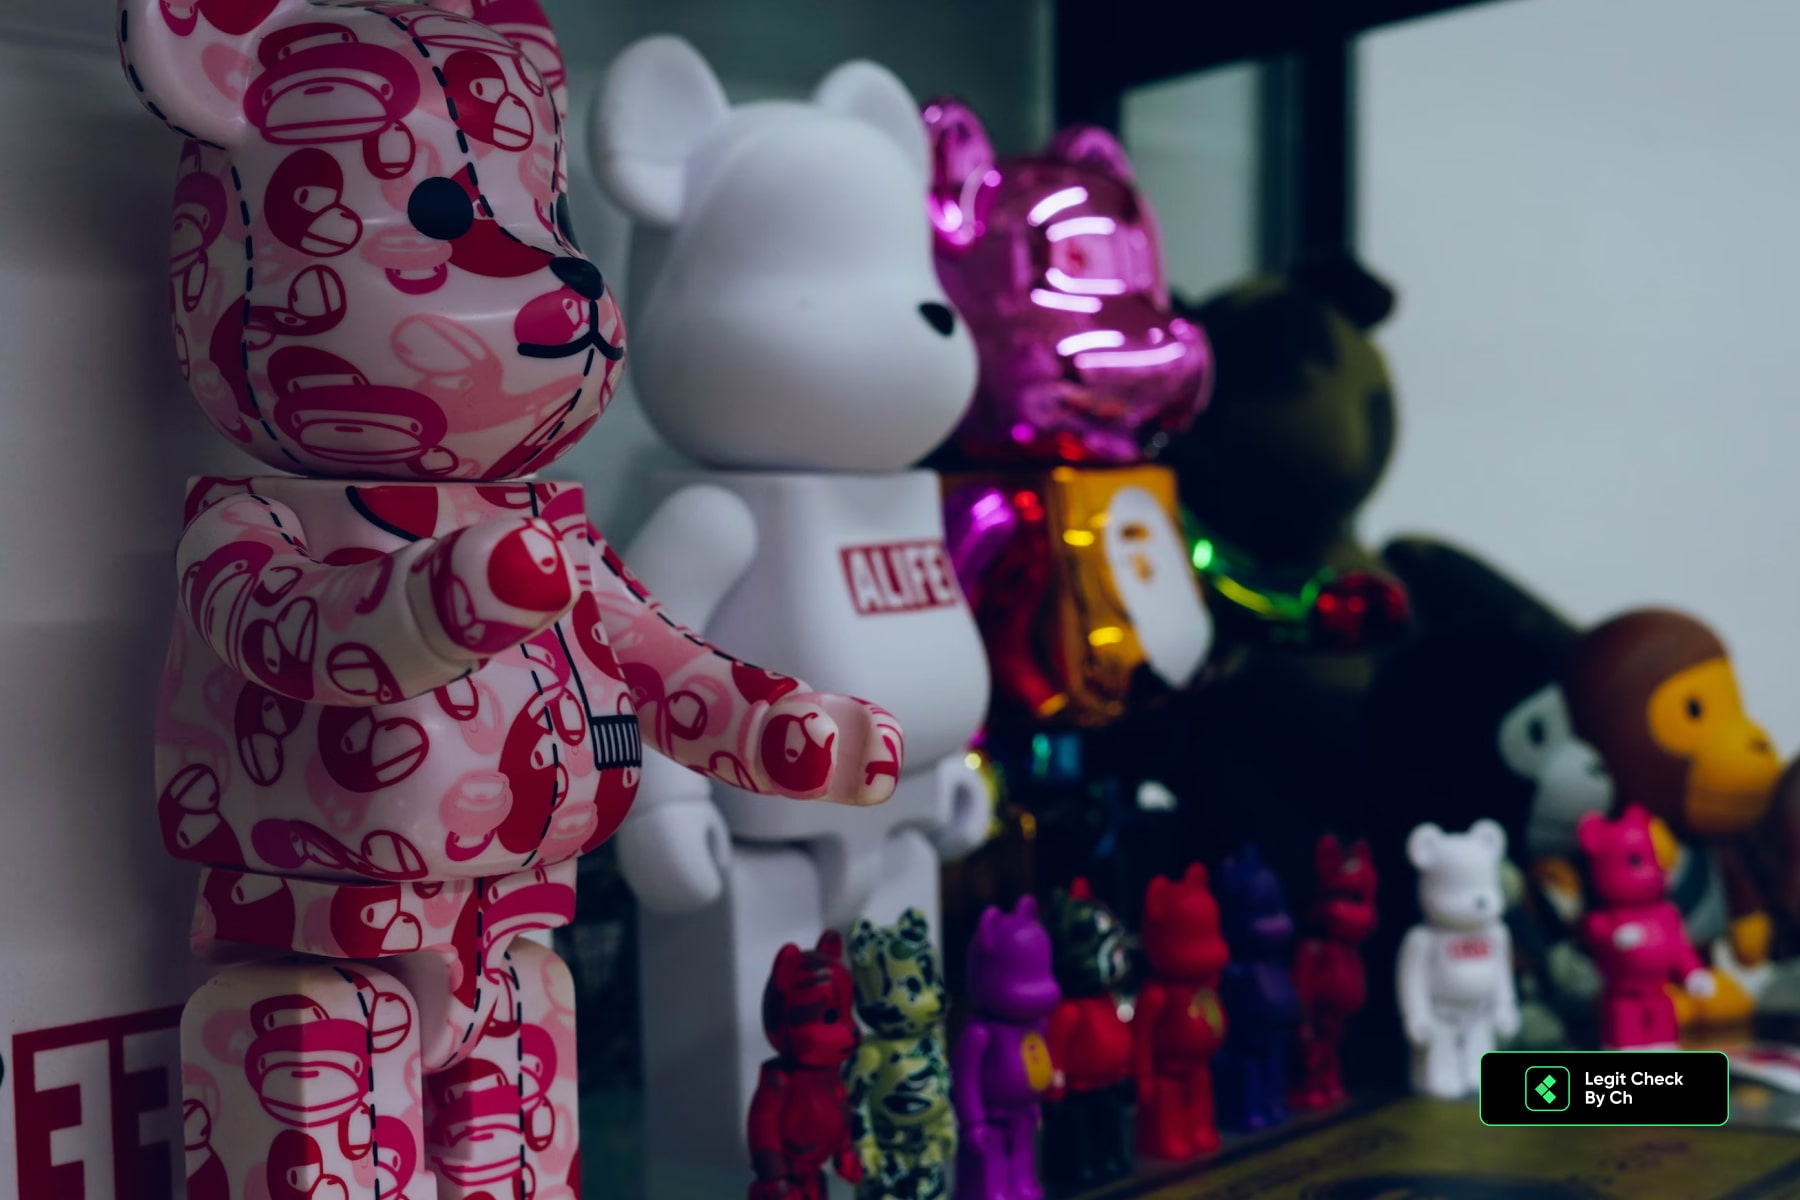 Collection of Bearbrick figures